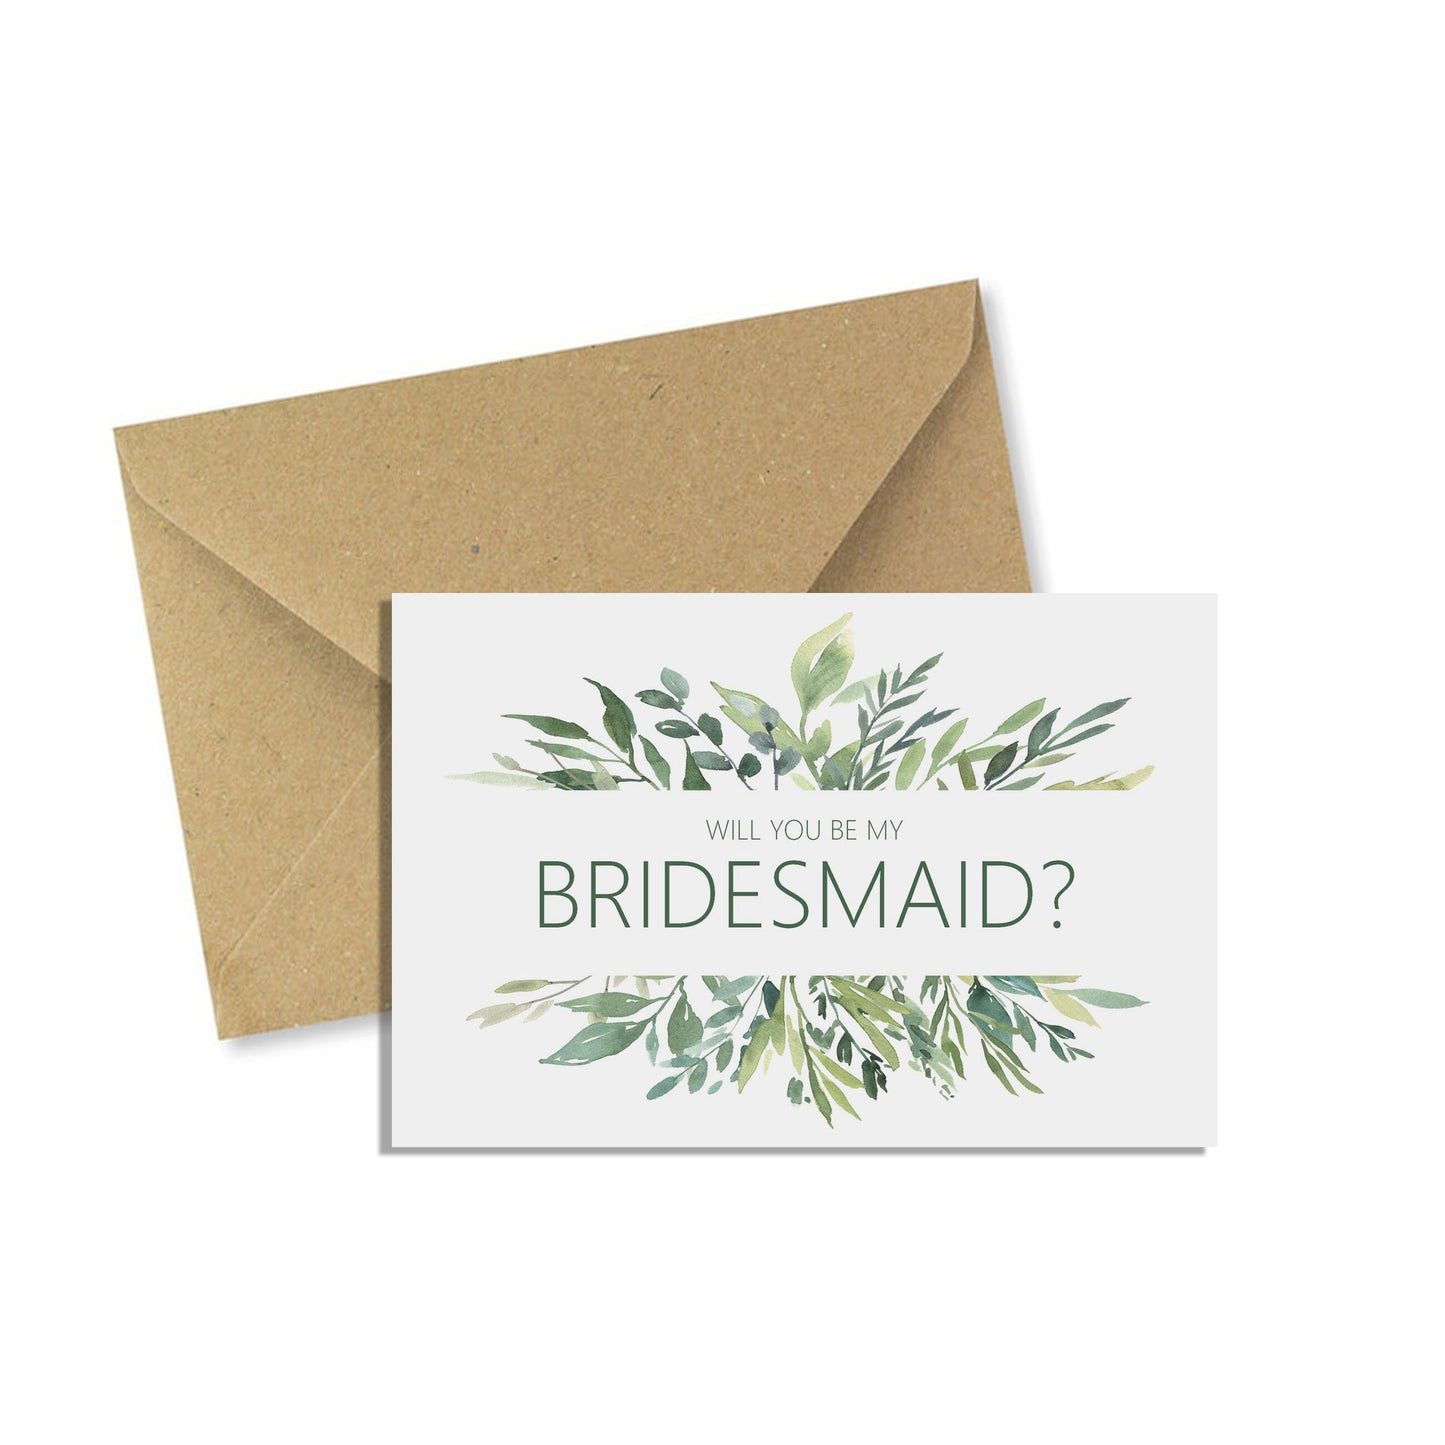 Will You Be My Bridesmaid? A6 Greenery Wedding Proposal Card With Kraft Envelope